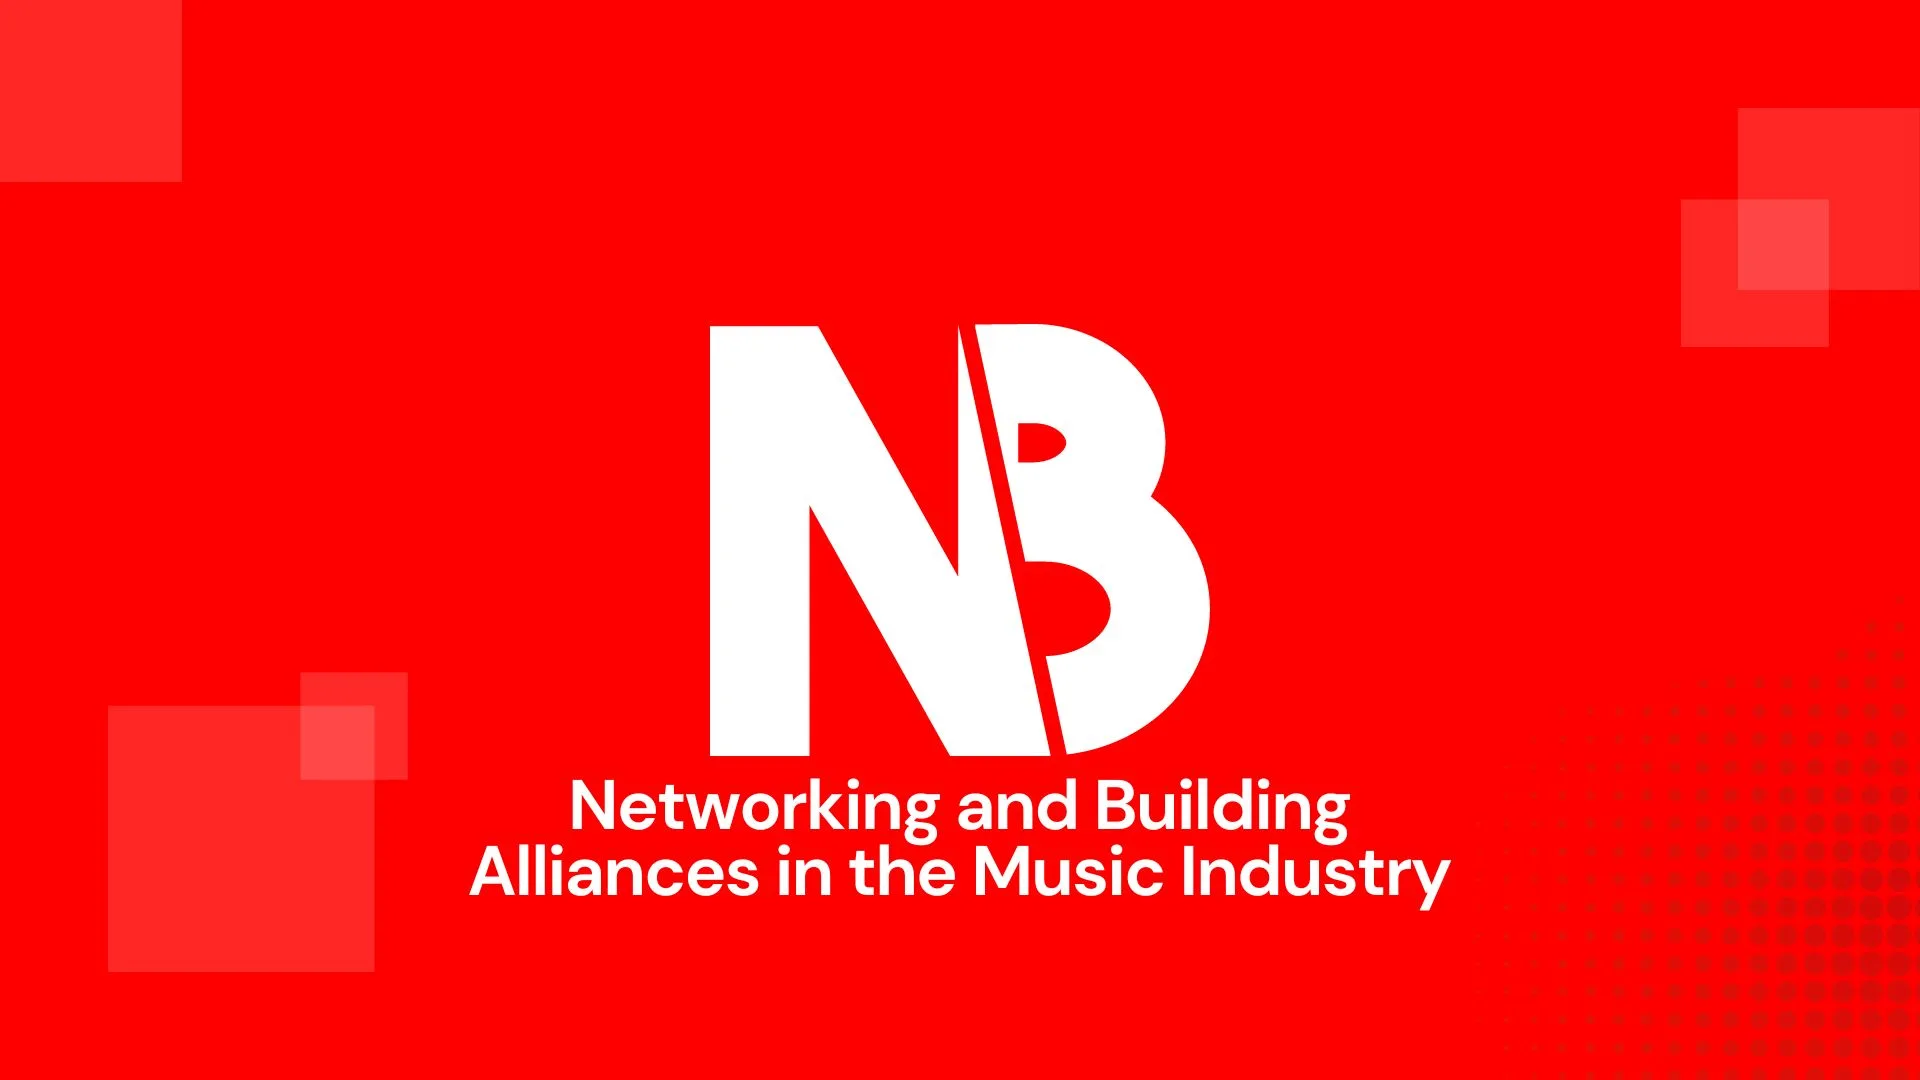 Networking and Building Alliances in the Music Industry